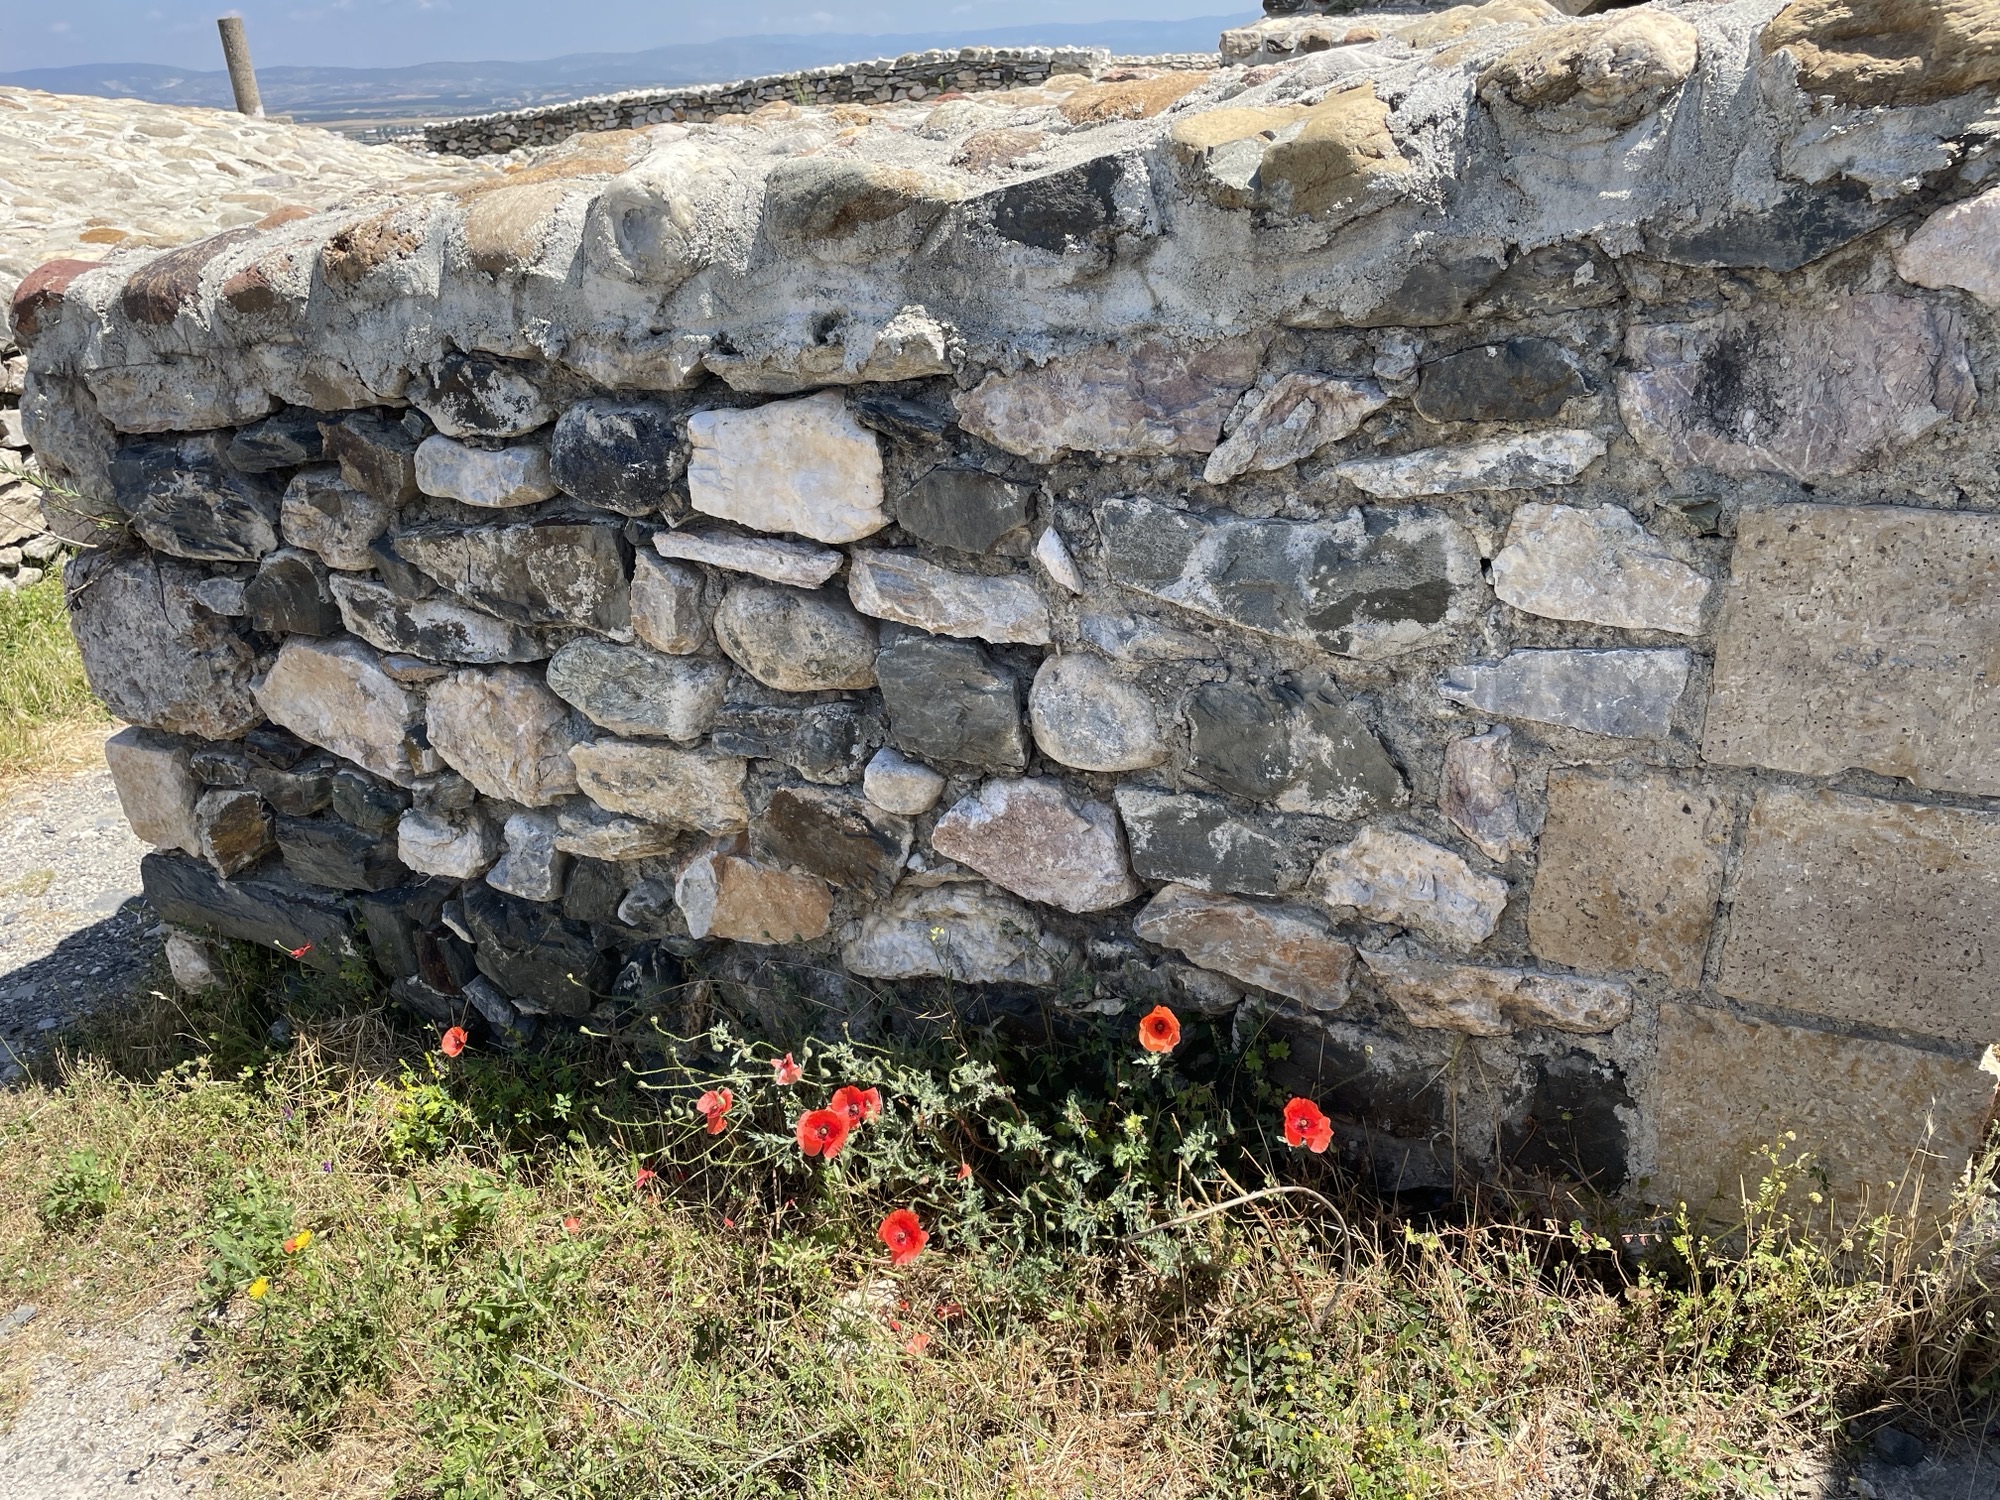 Another stone wall. This one has a bunch of red flowers growing along its base.